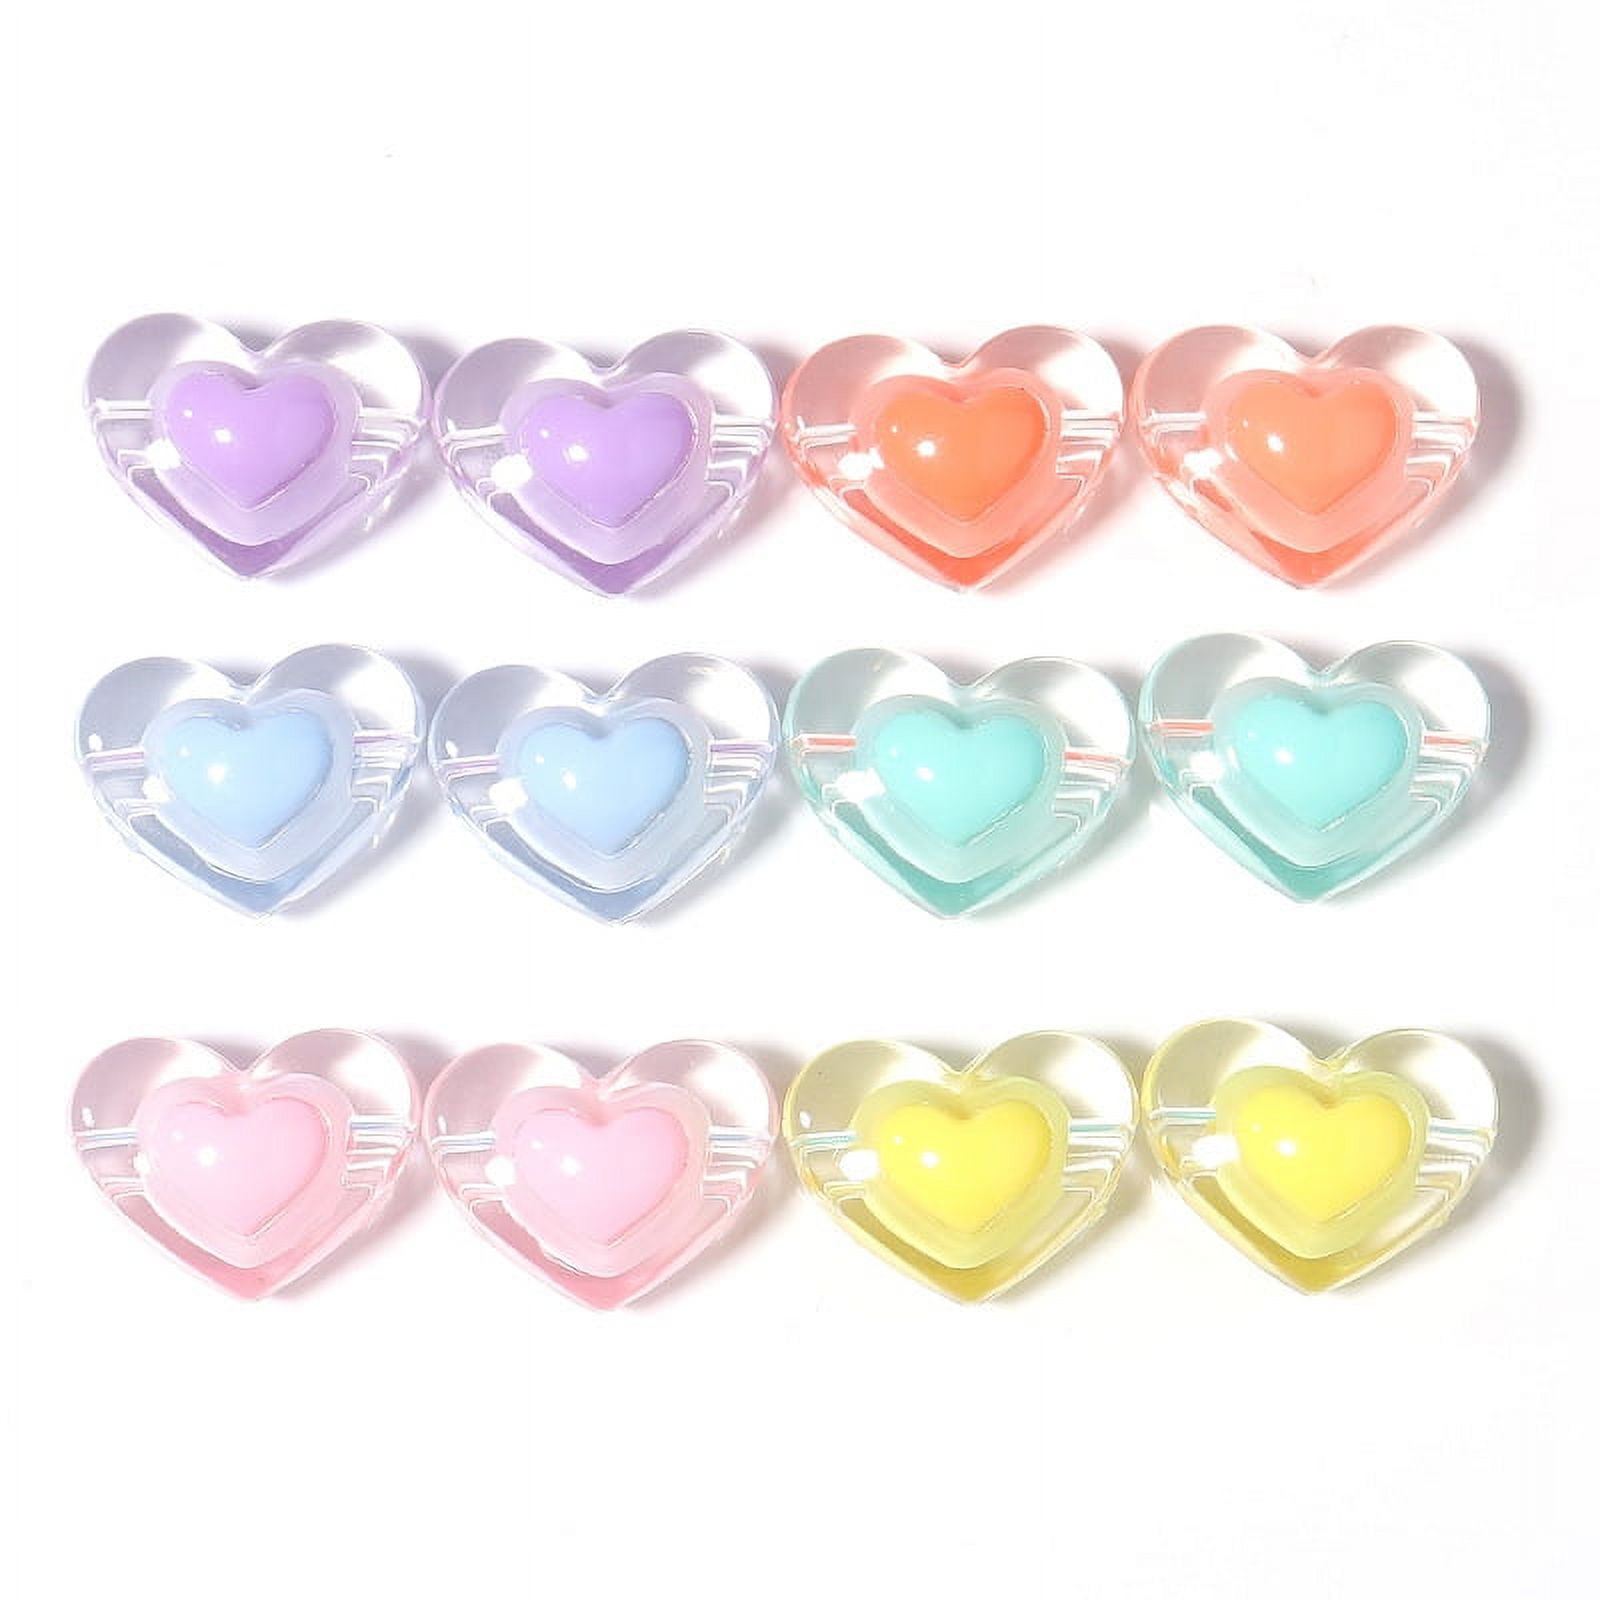  200Pcs Acrylic Star and Heart Shape Beads,Acrylic Beads Crystal  Star Beads Heart Beads for Jewelry Colorful Acrylic Beads for DIY Craft  Making Necklace Bracelet Supplies